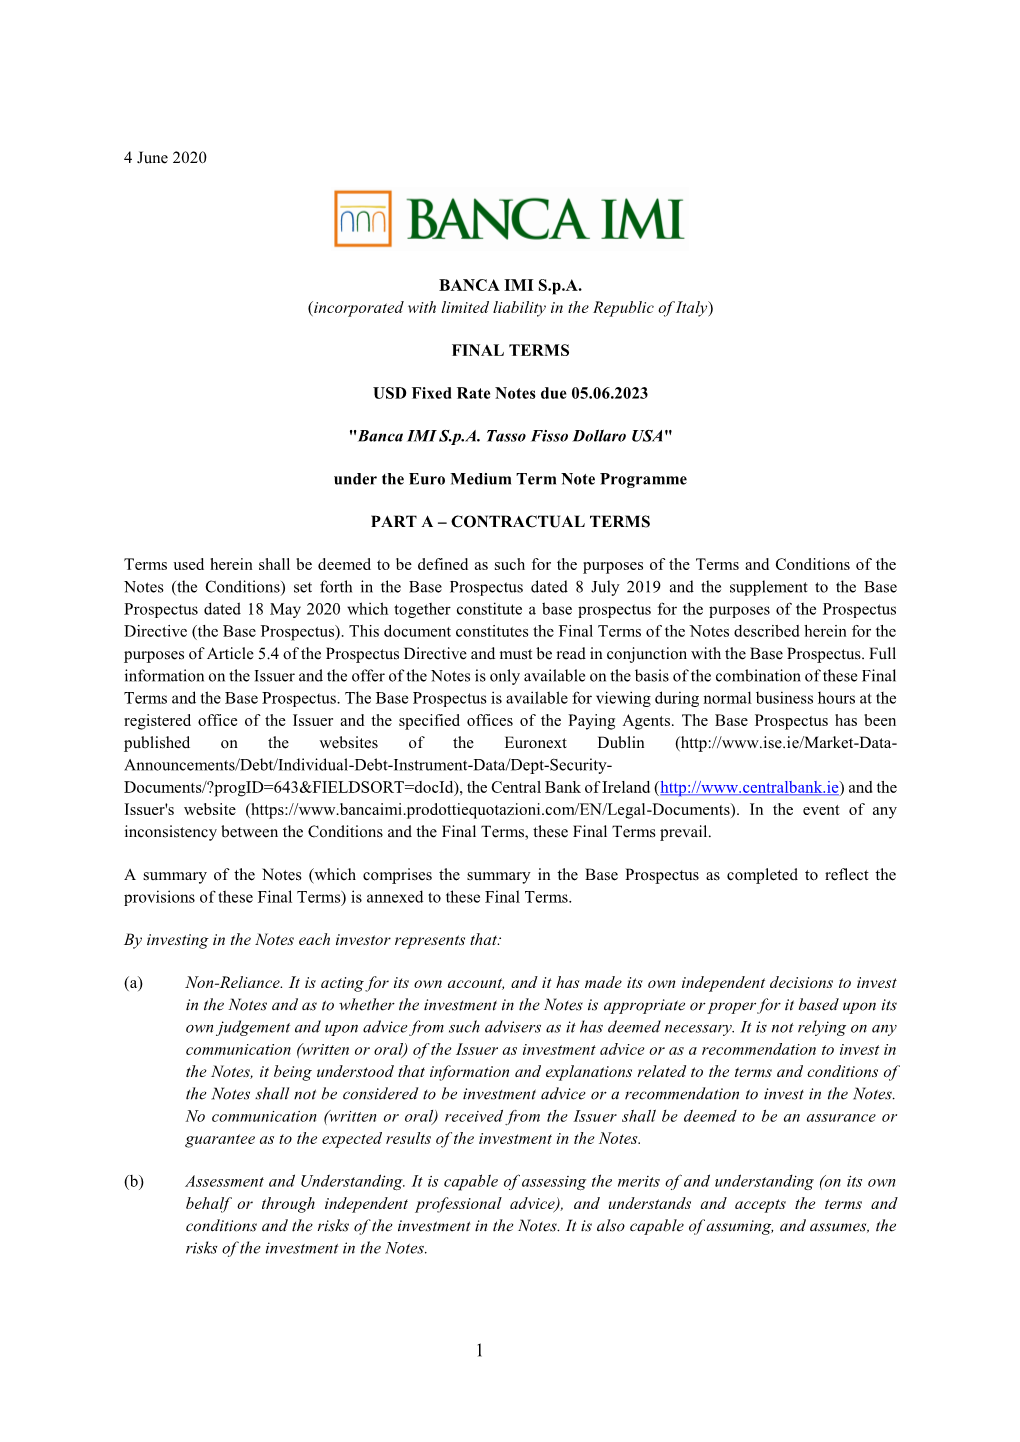 4 June 2020 BANCA IMI S.P.A. (Incorporated with Limited Liability in the Republic of Italy) FINAL TERMS USD Fixed Rate Notes